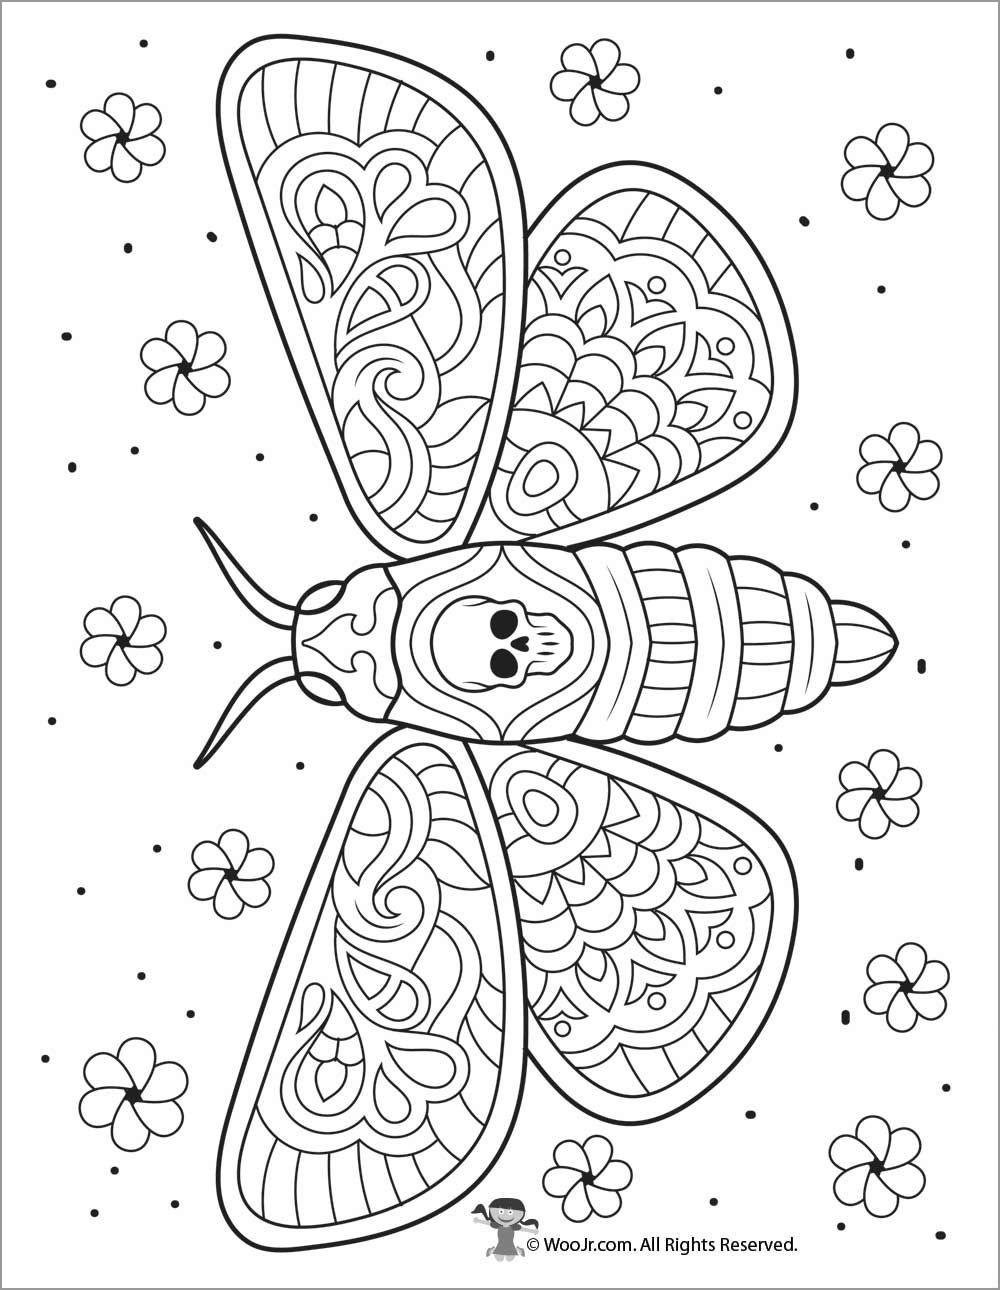 Moth Coloring Page for Adults